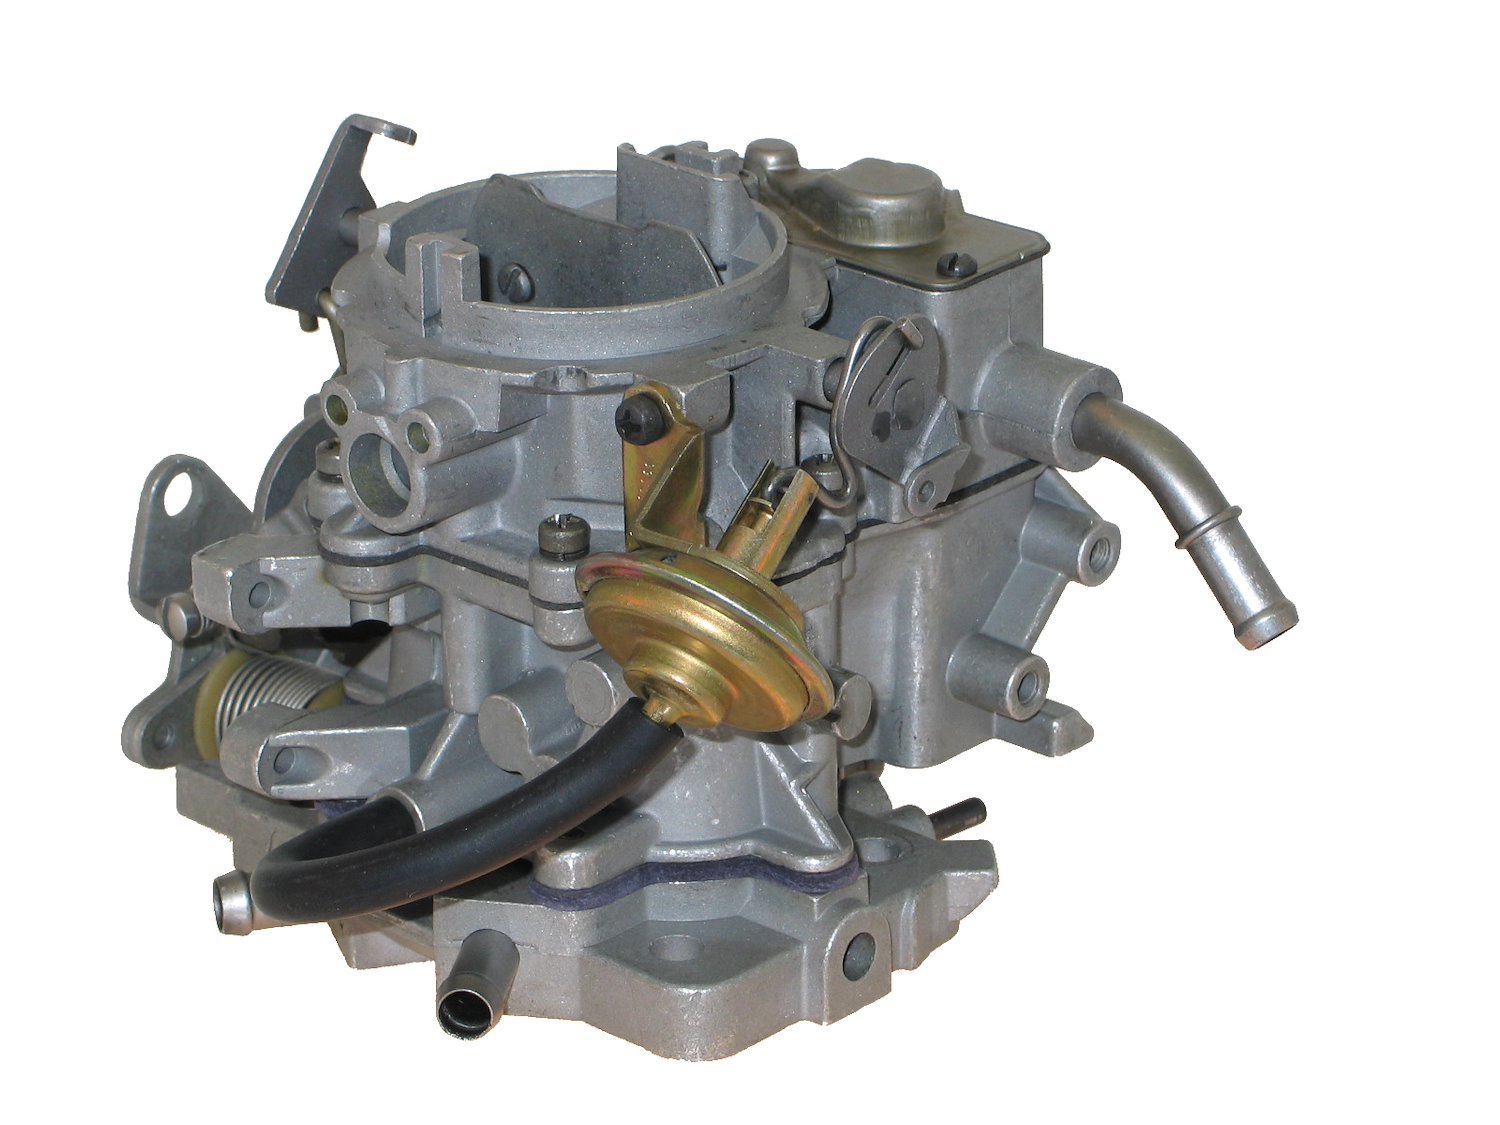 6-6337 Holley Remanufactured Carburetor, 2280-Style